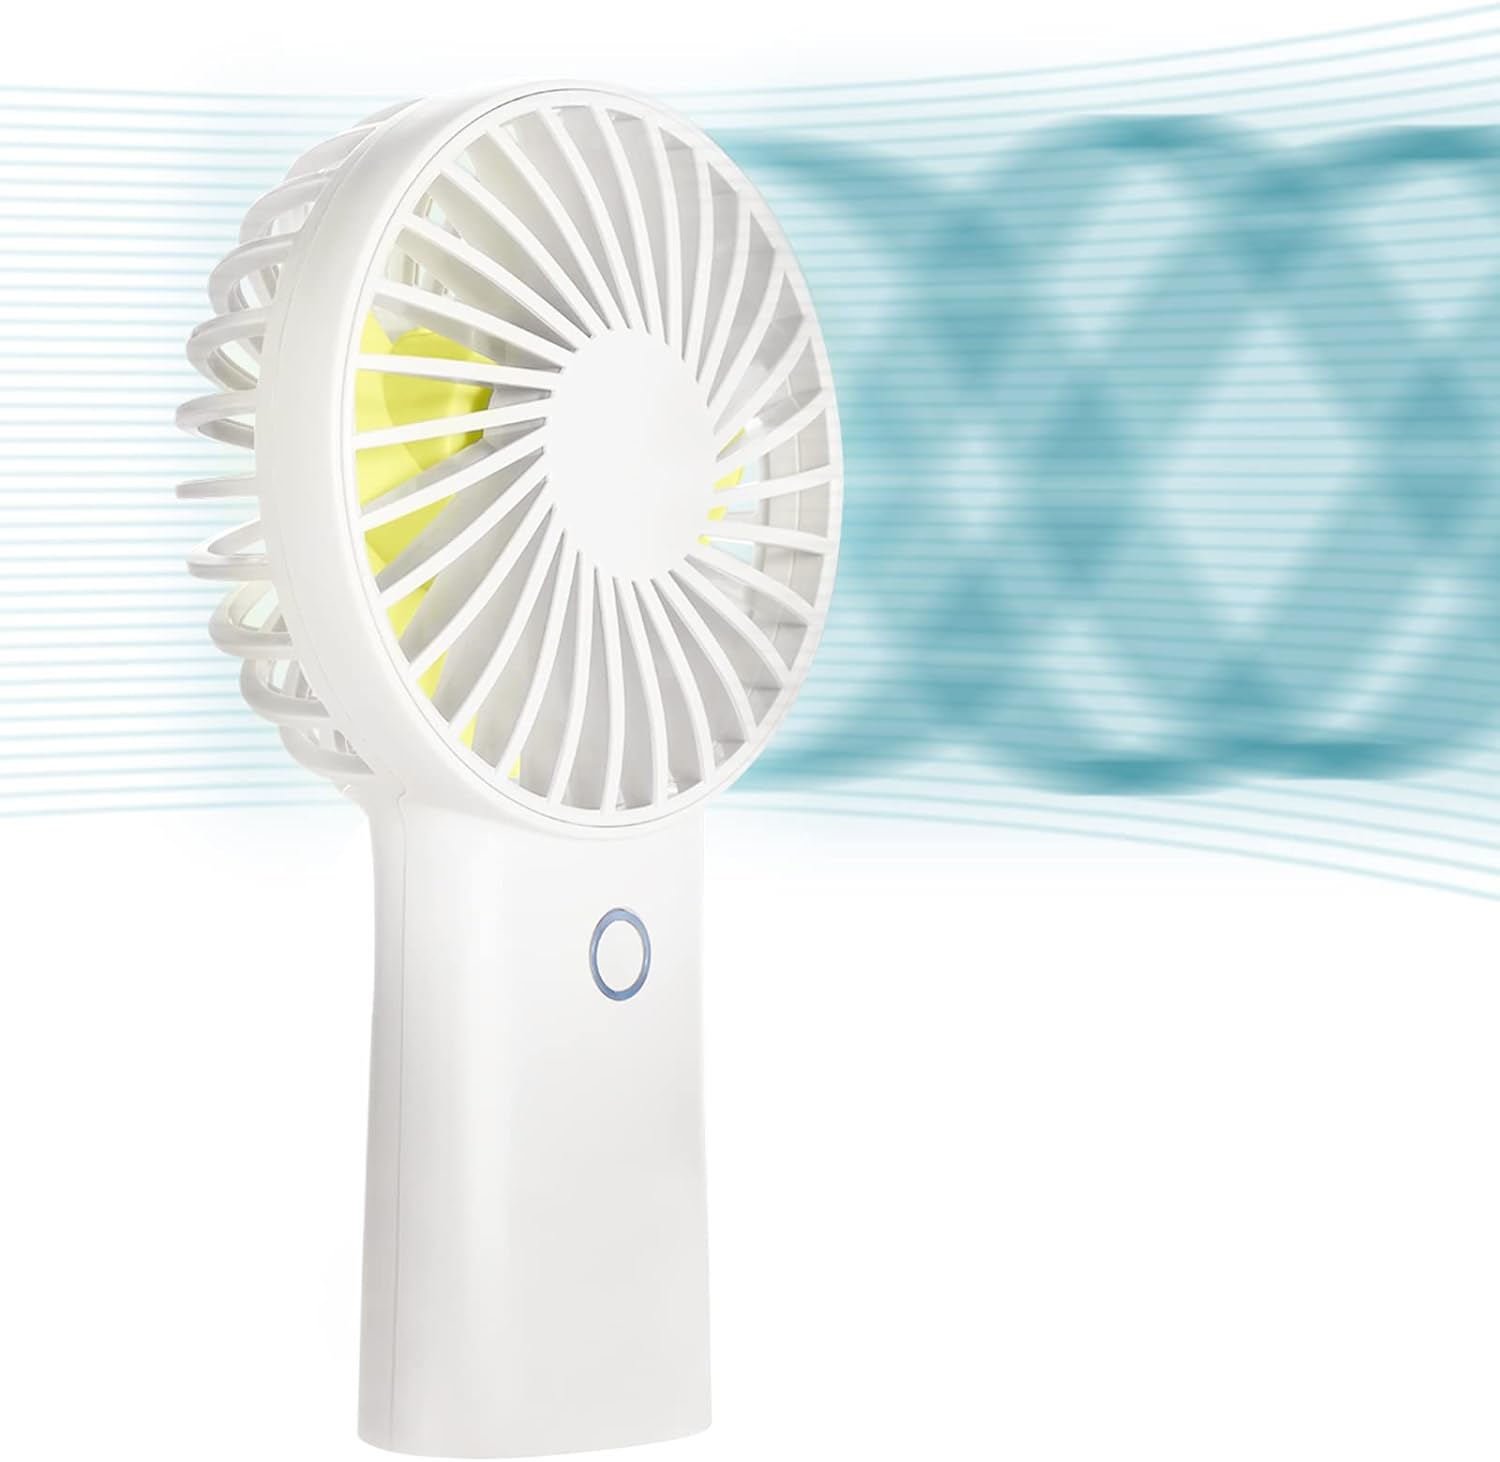 JISULIFE 6000mAh Handheld Fan [30H Max Cooling Time] Mini Portable Hand Fan, USB Rechargeable Small Personal Fan,Battery Operated Hand Fan with 3 Speeds for Travel/Commute/Picnic/Office-White